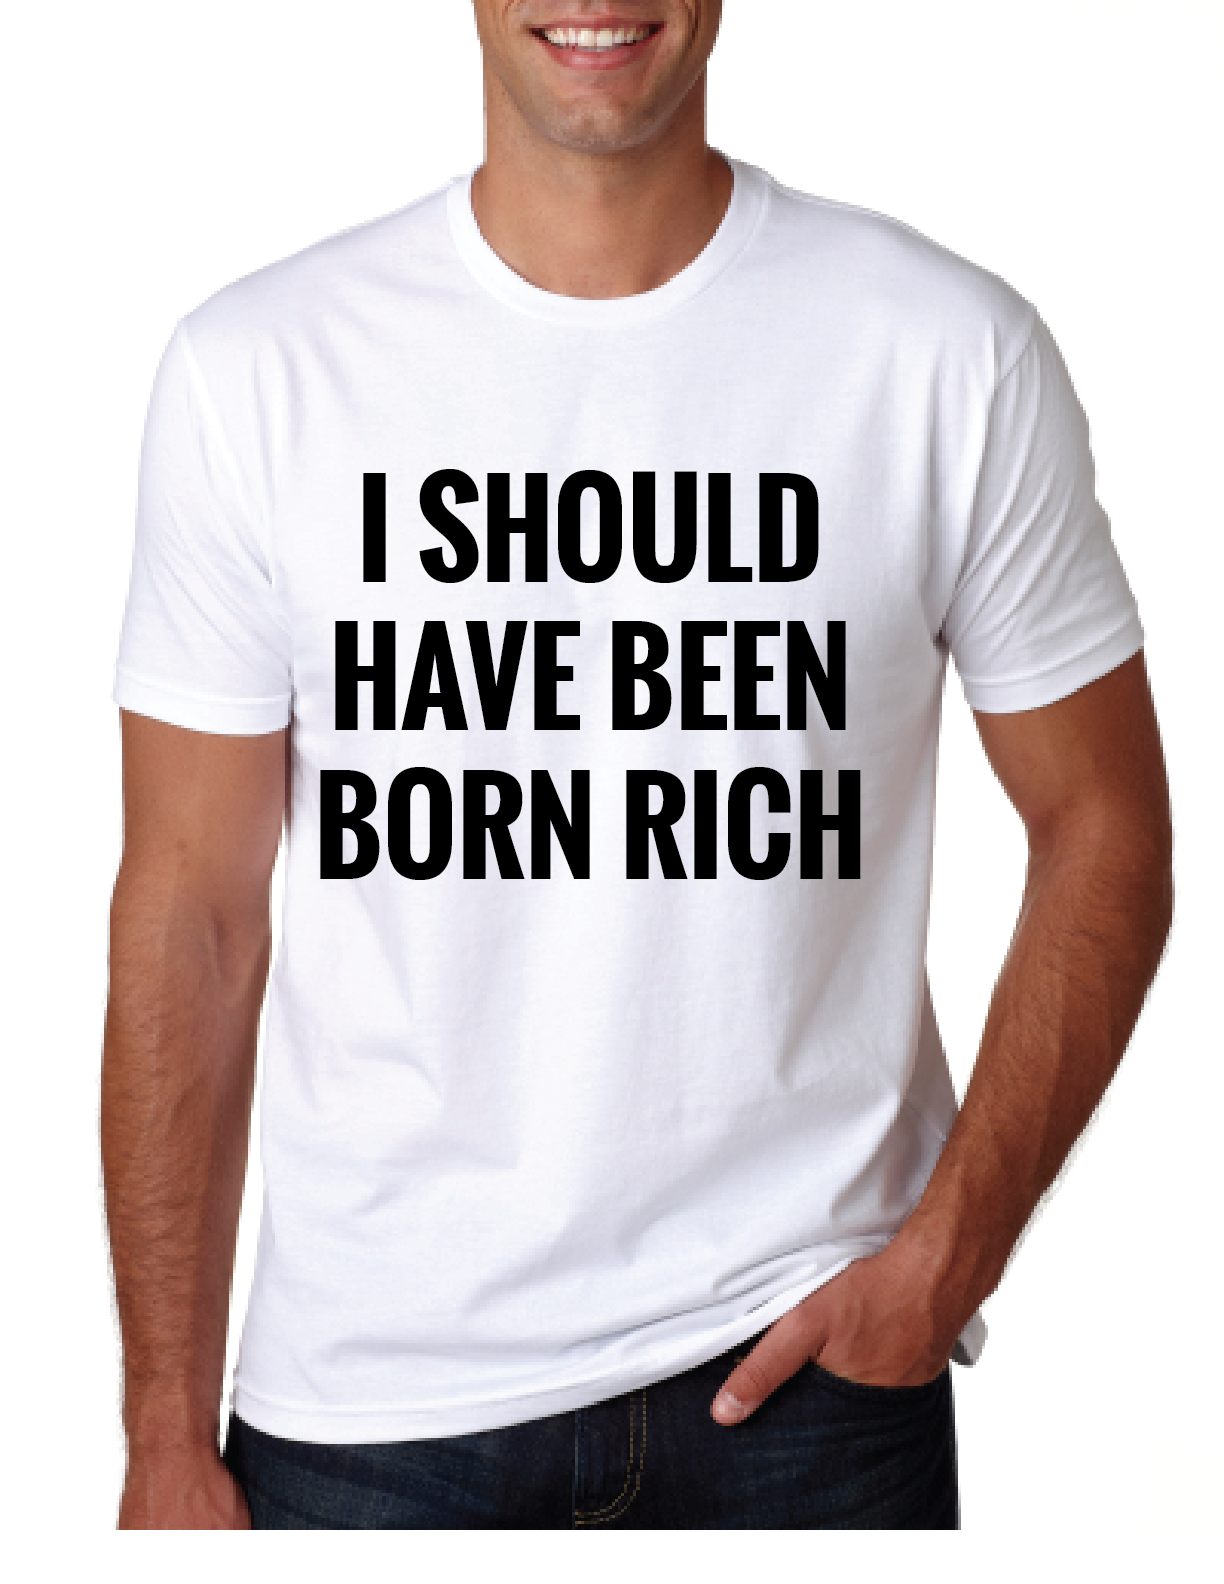 I SHOULD HAVE BEEN BORN RICH